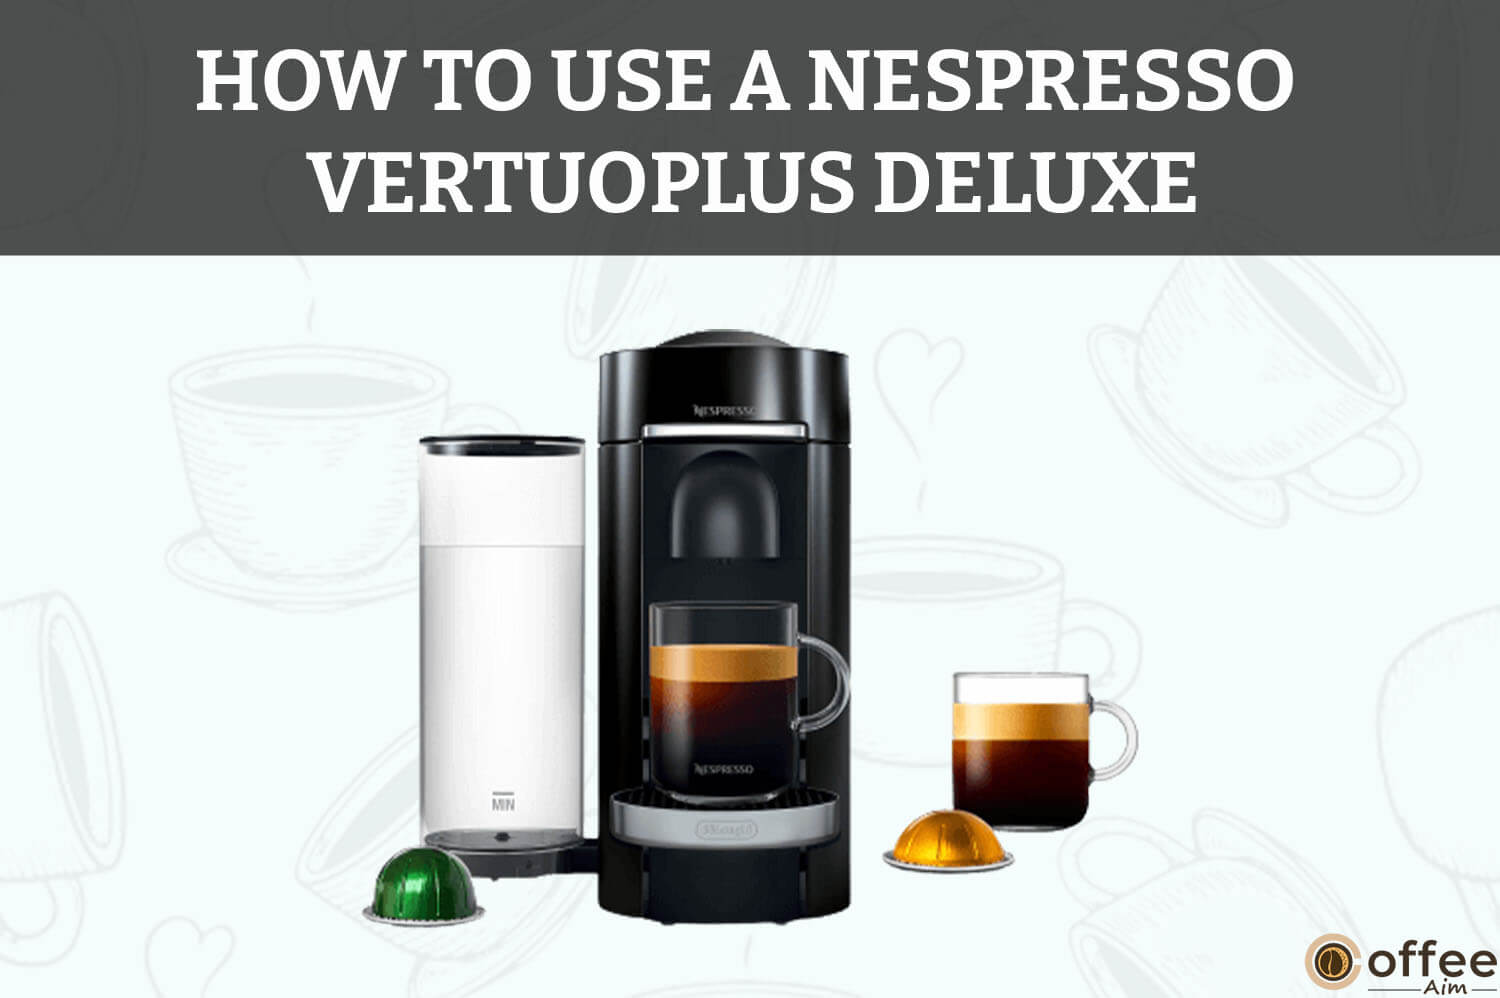 Featured image for the article "How to Use A Nespresso VertuoPlus Deluxe"